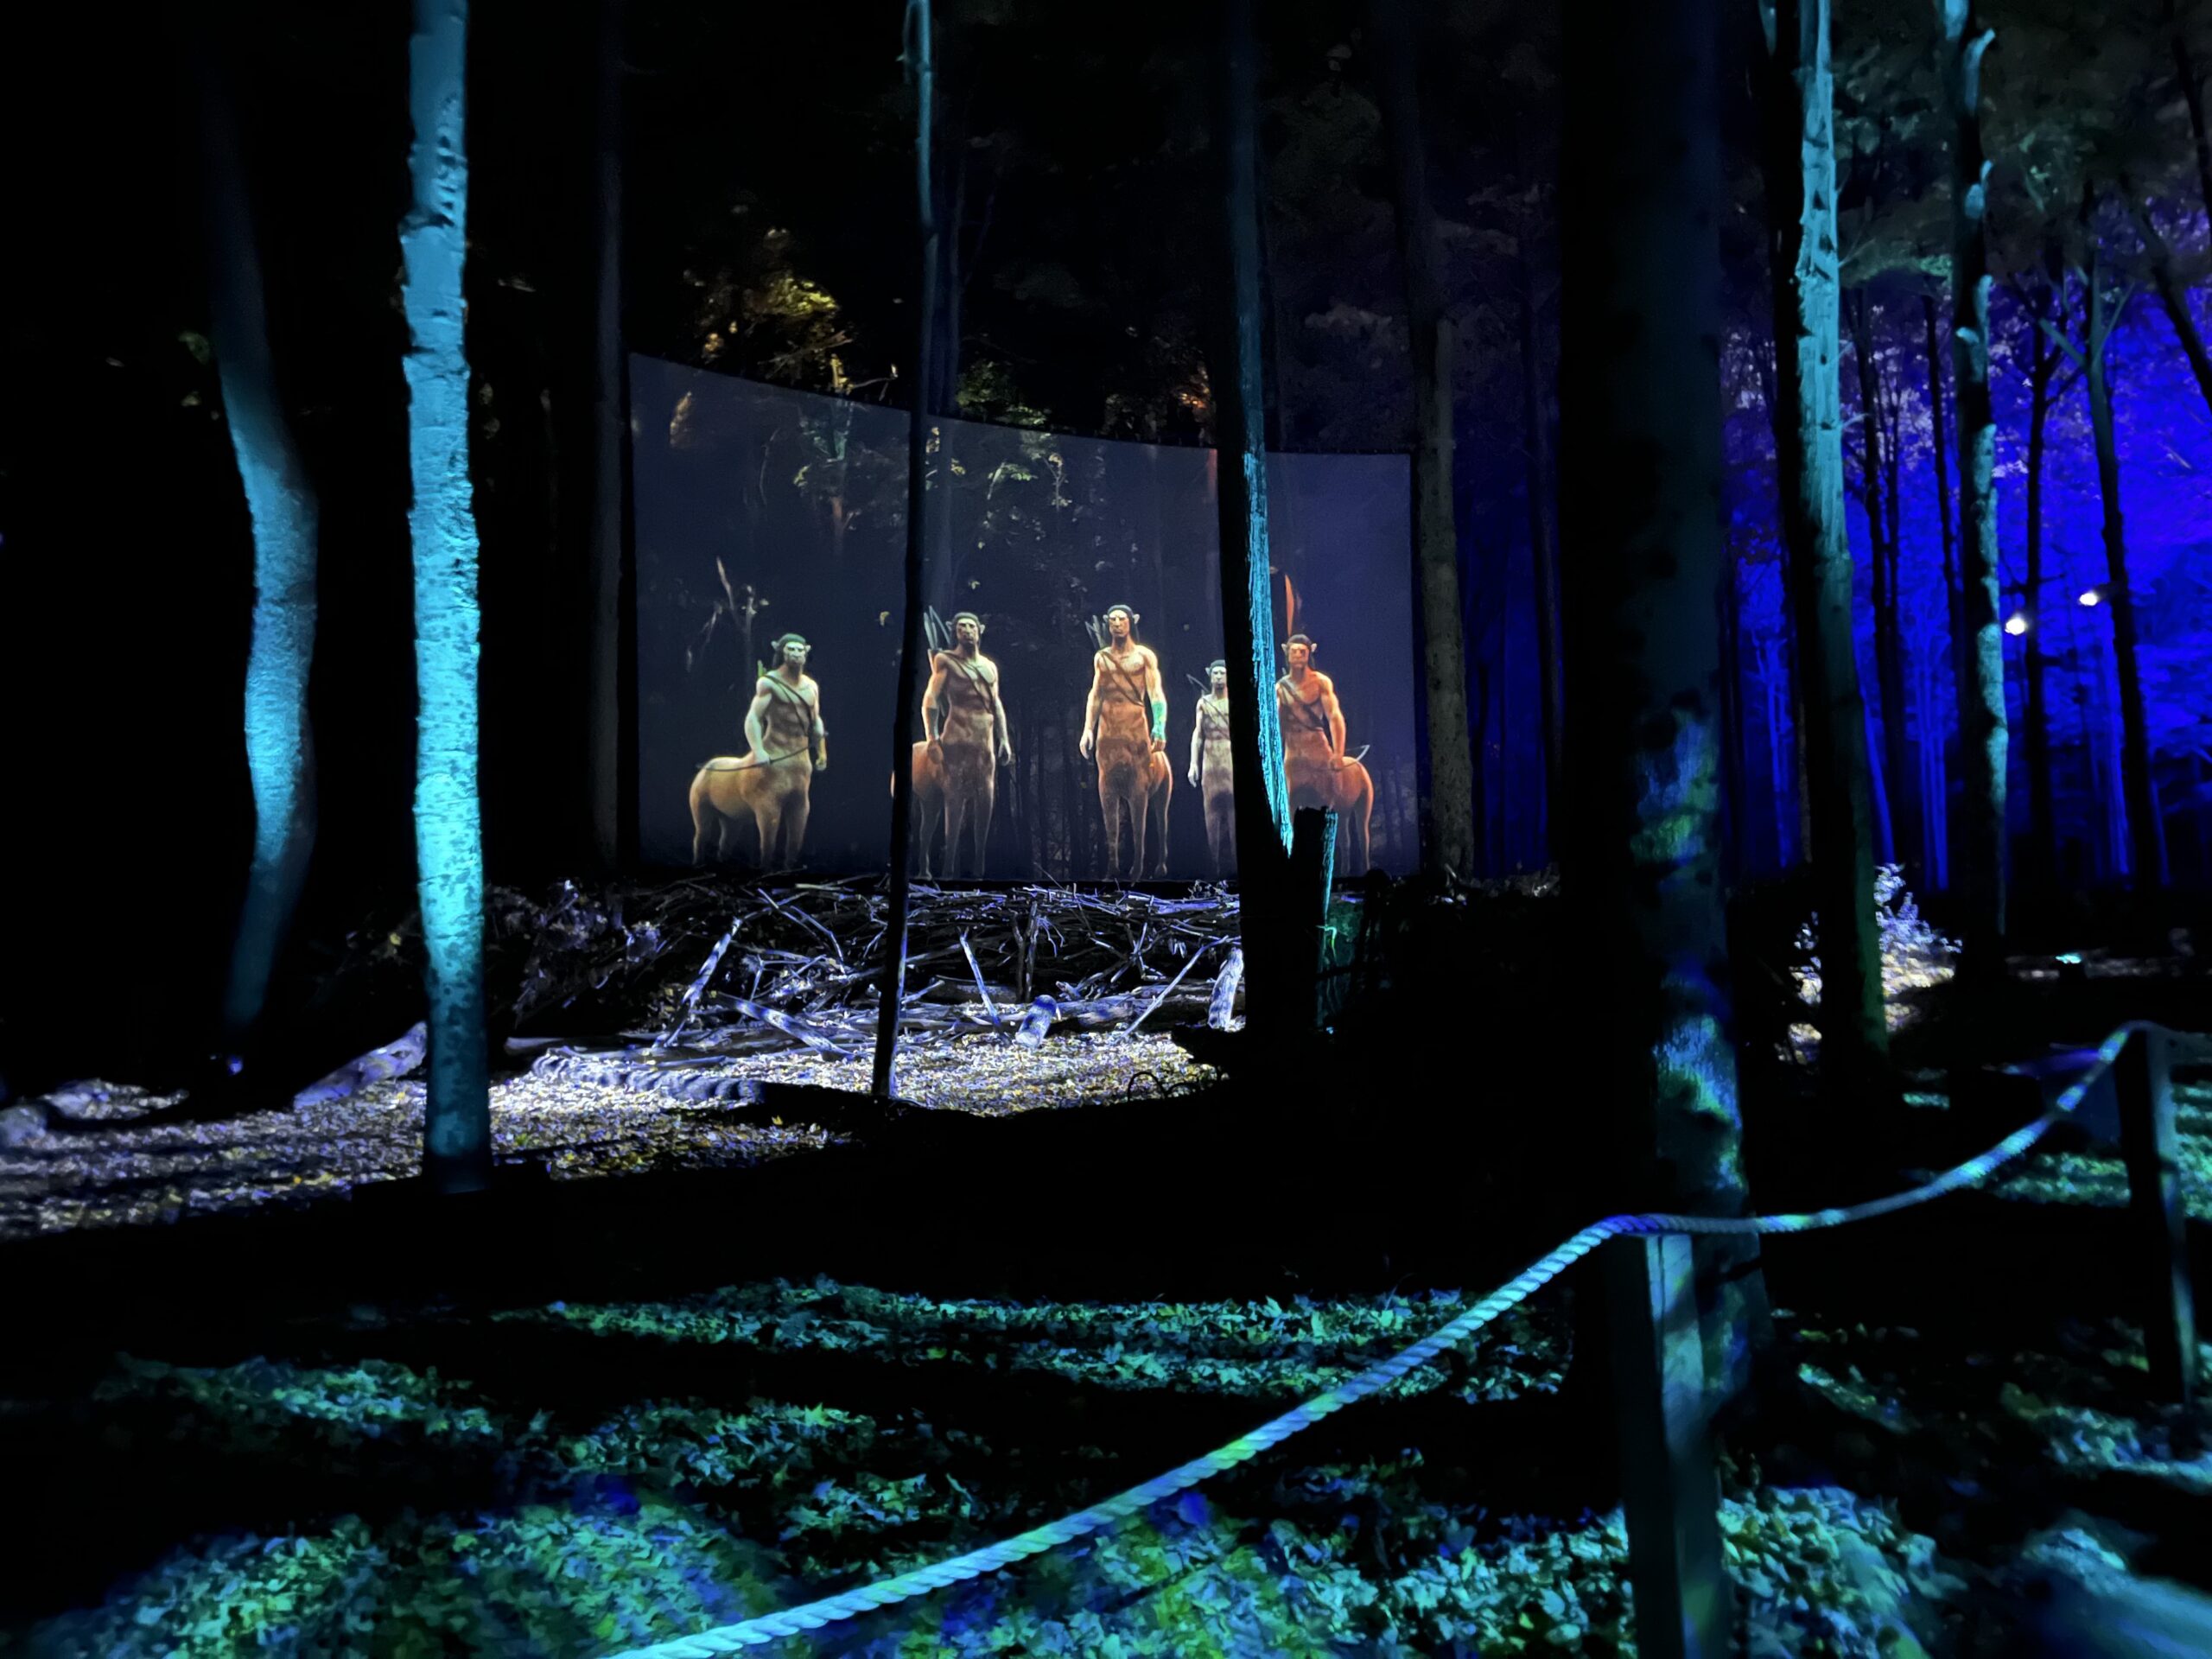 This animation shows centaurs in the Forbidden Forest experience.